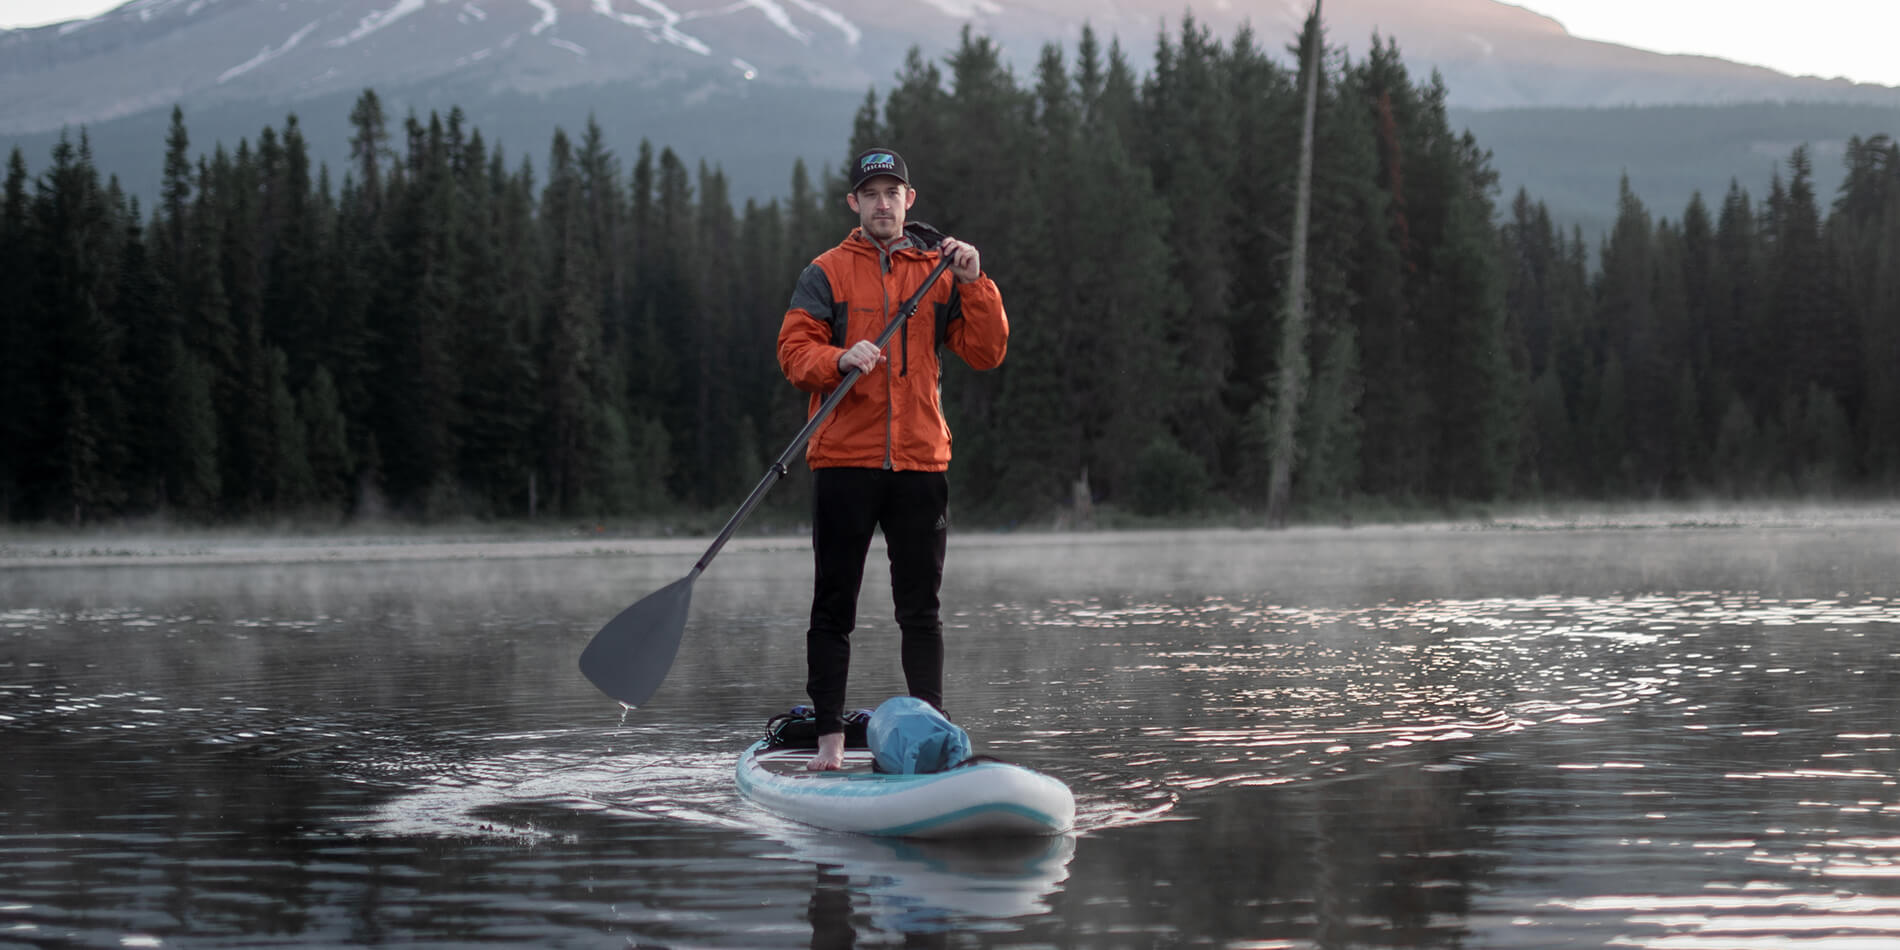 Paddle Boarding with Gear: Bungees